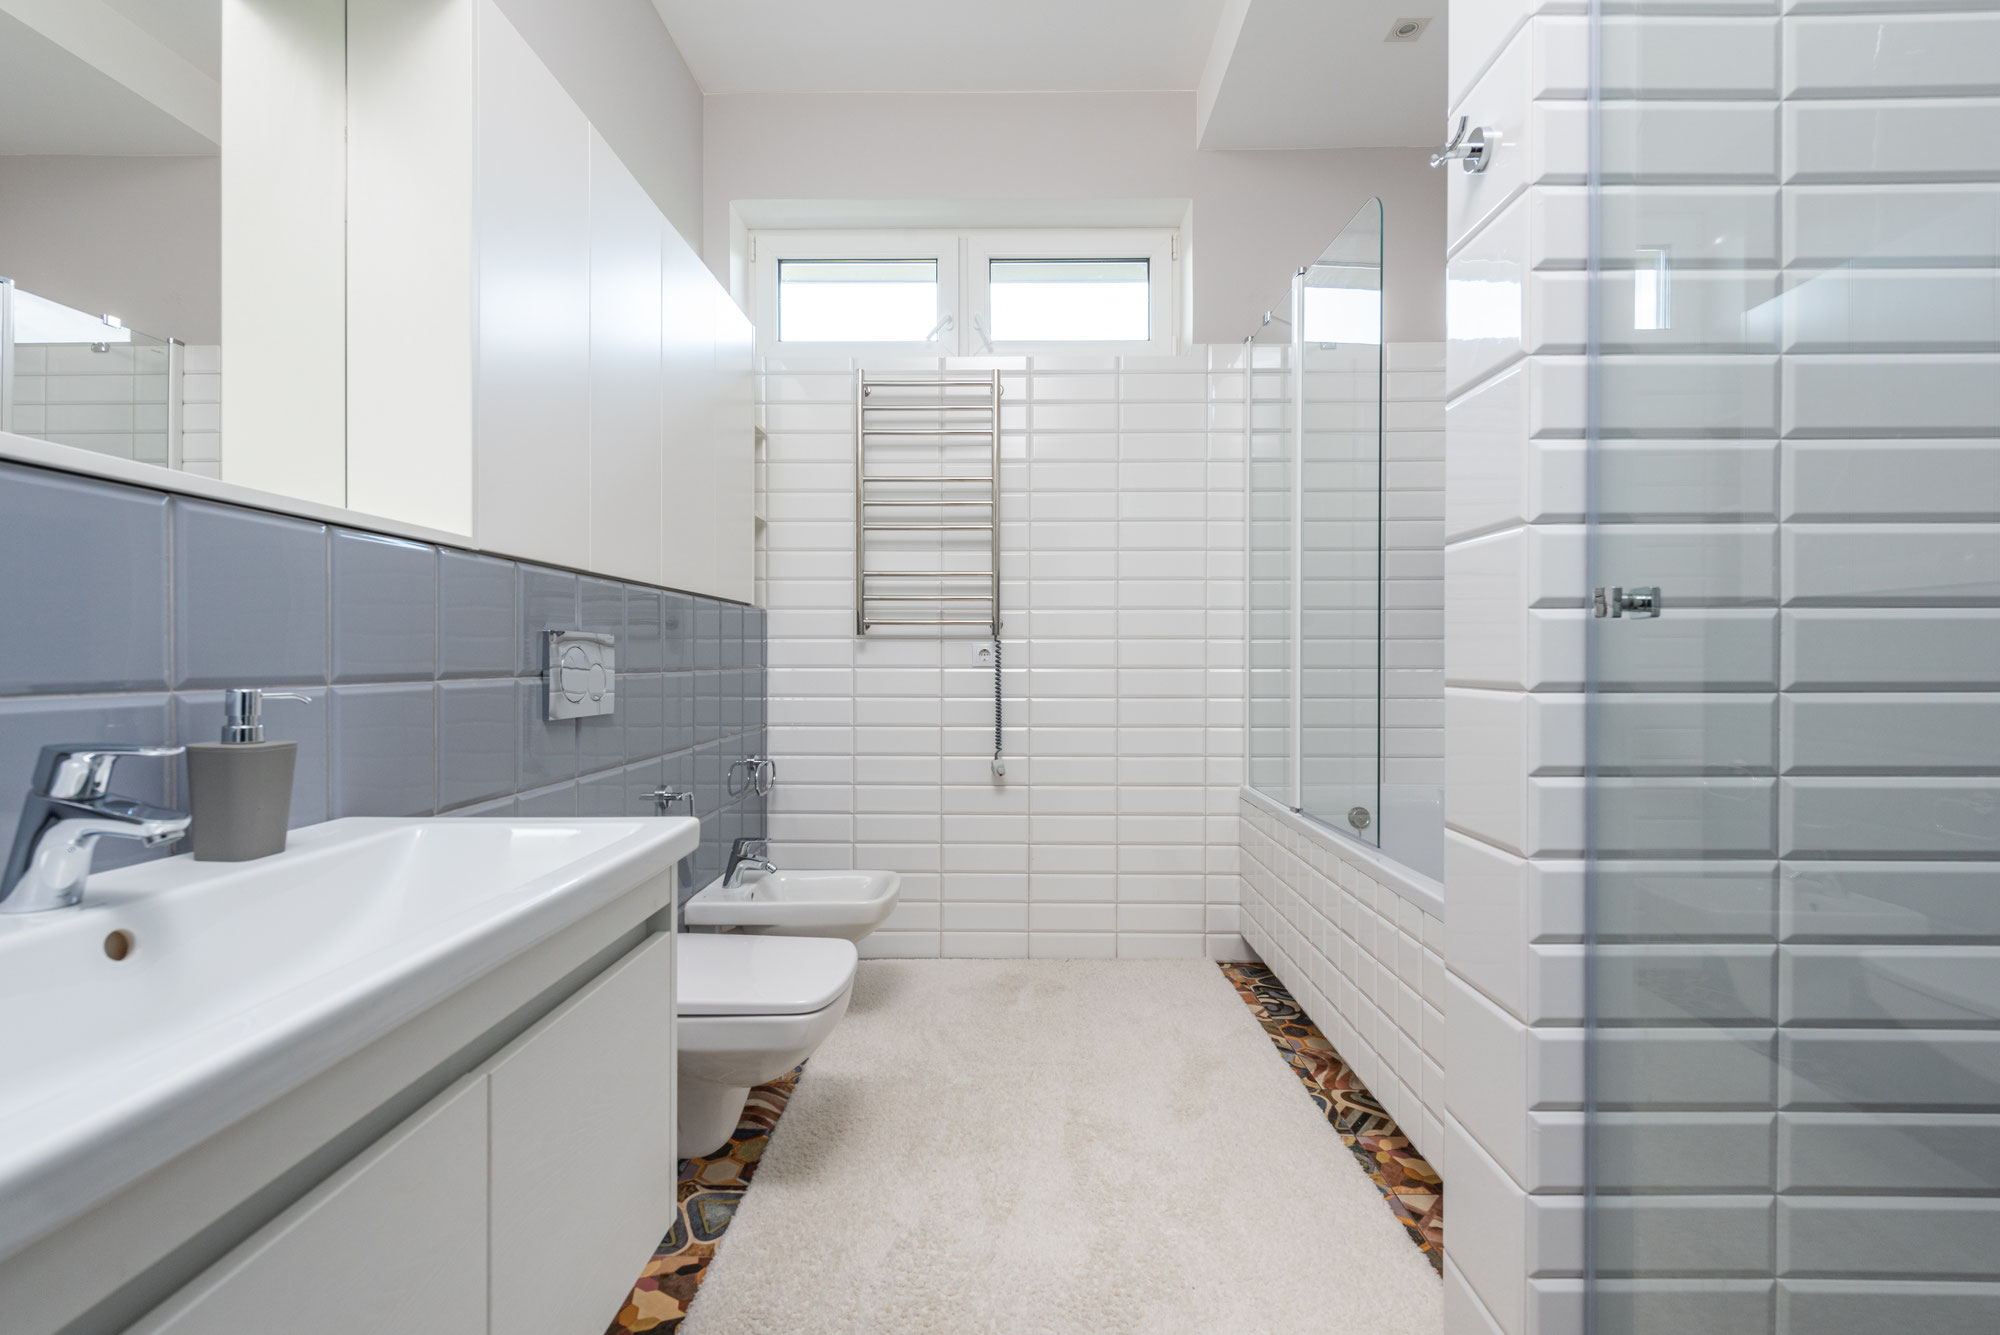 Choosing the Perfect Ceramic Tile for Your Home